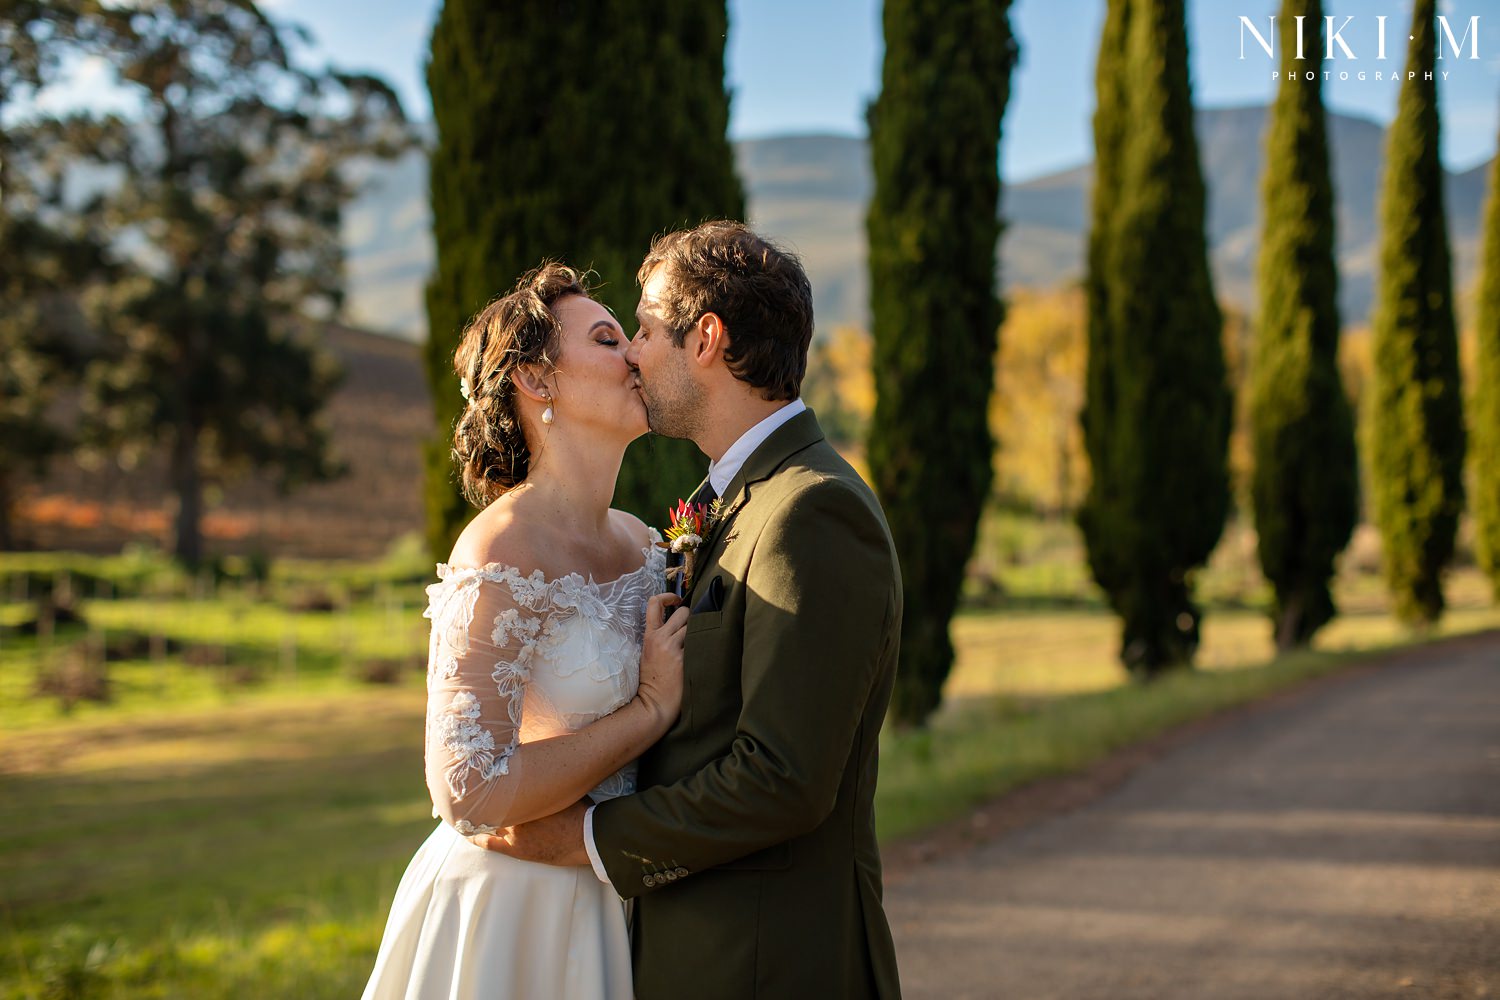 Cypress trees and the bridal couple after their ceremony at Paul Cluver Wine's chapel for their Elgin wedding